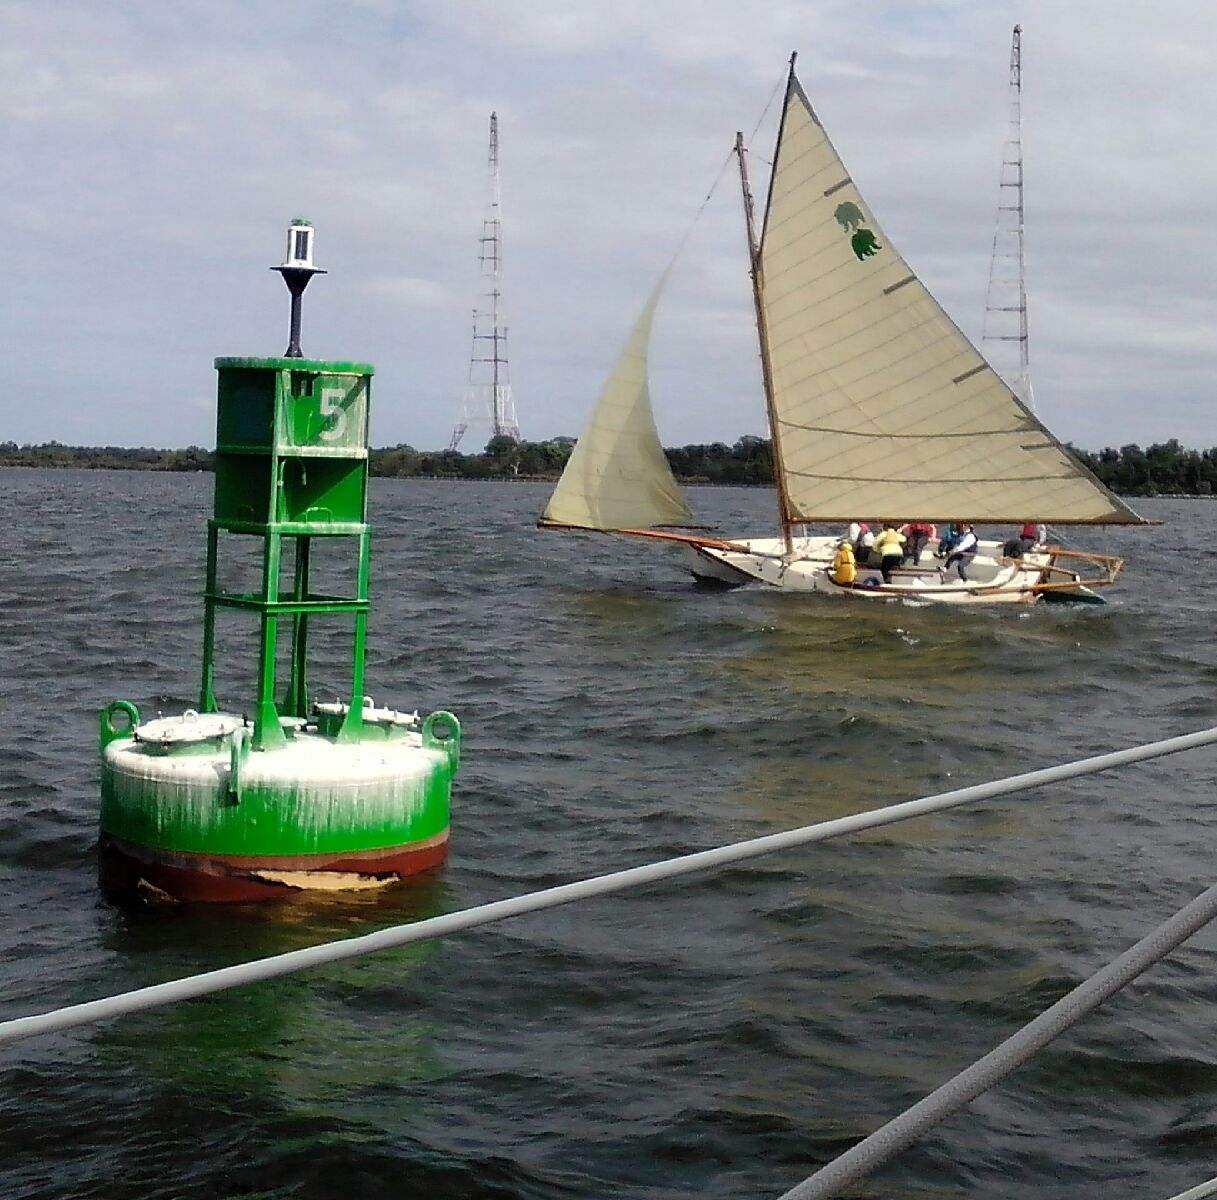 A sailboat racing in the Wooden Boat Regatta sailing around a marker